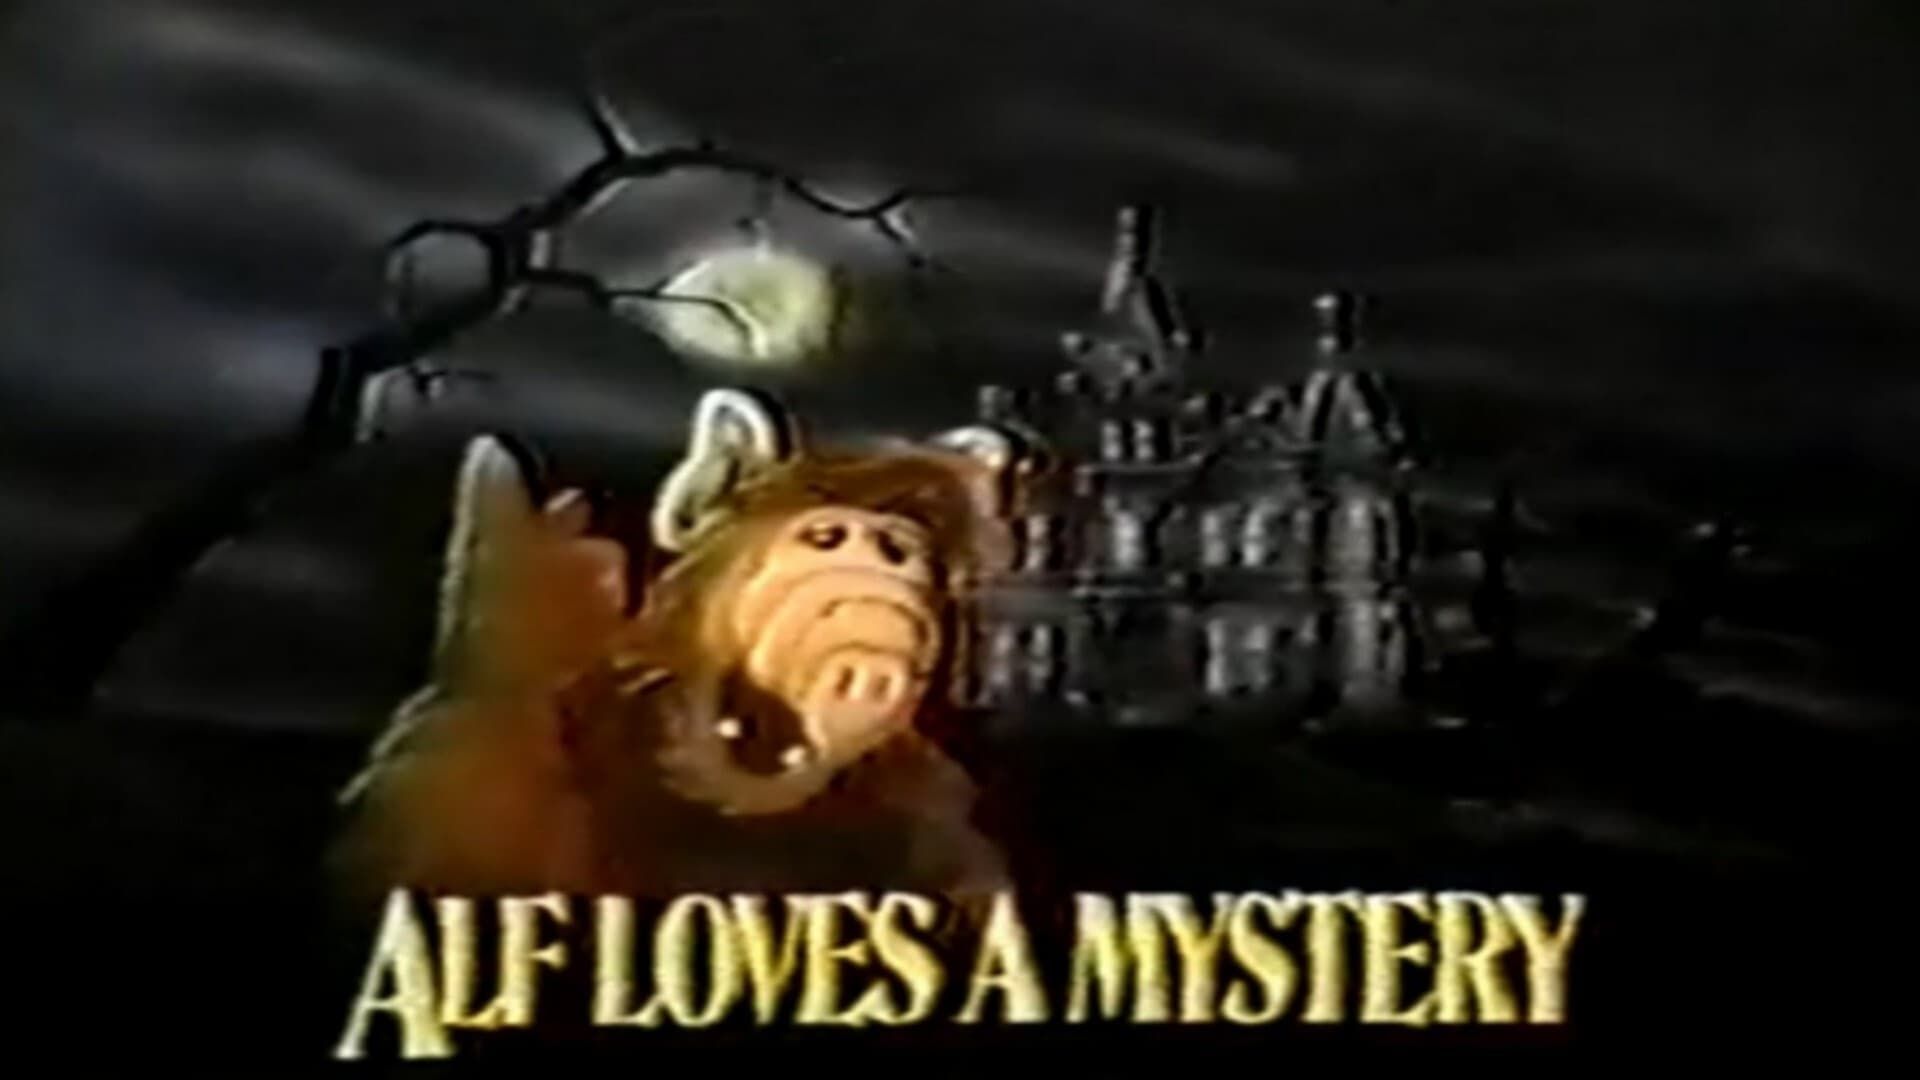 Alf Loves a Mystery background